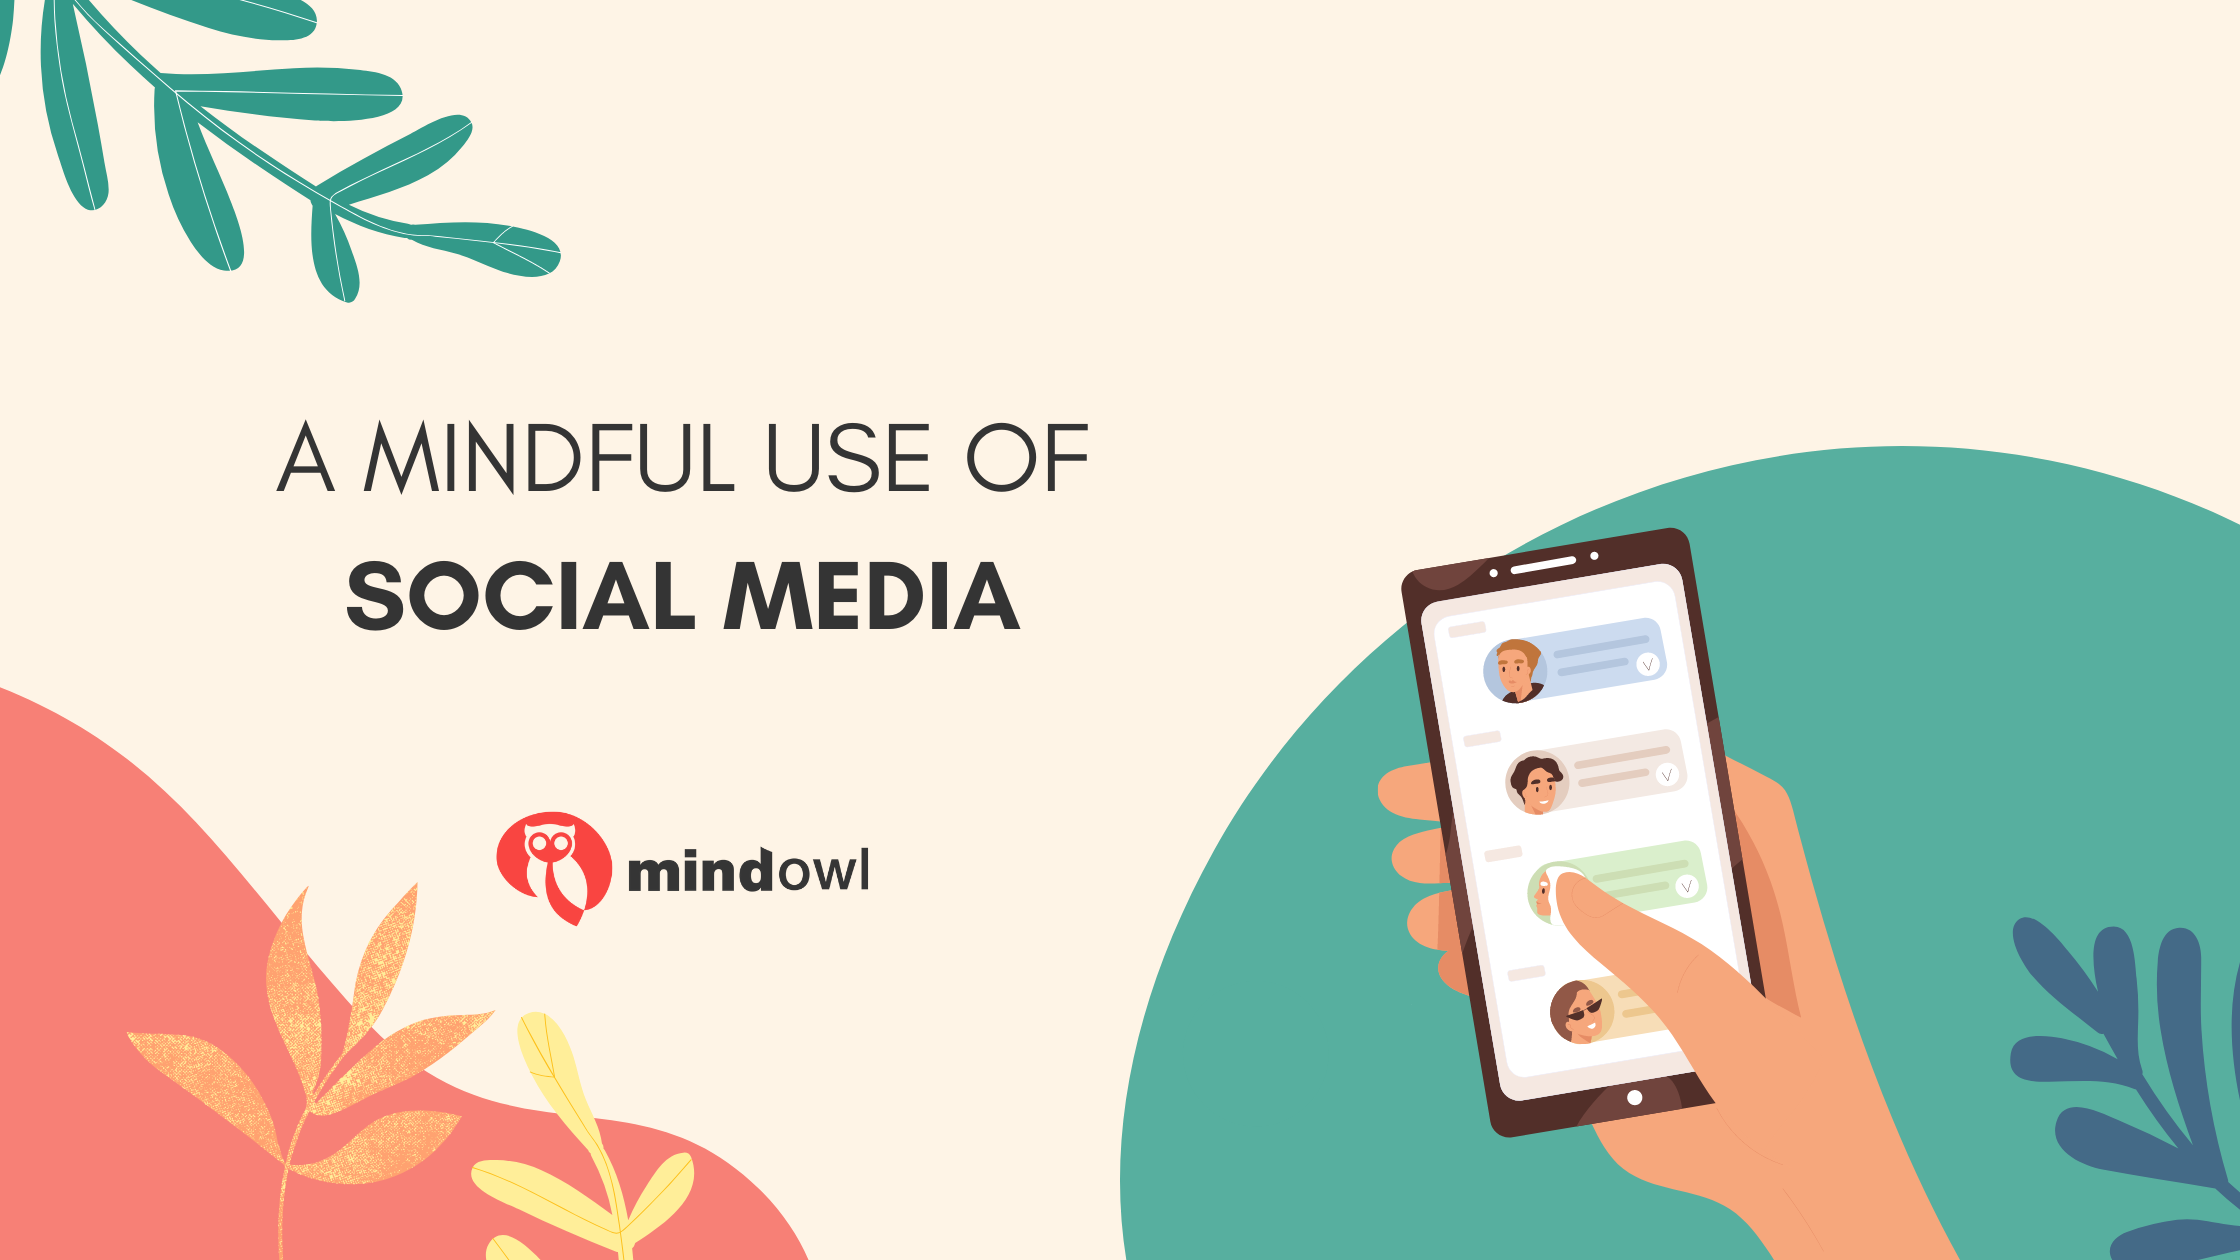 A mindful use of social media